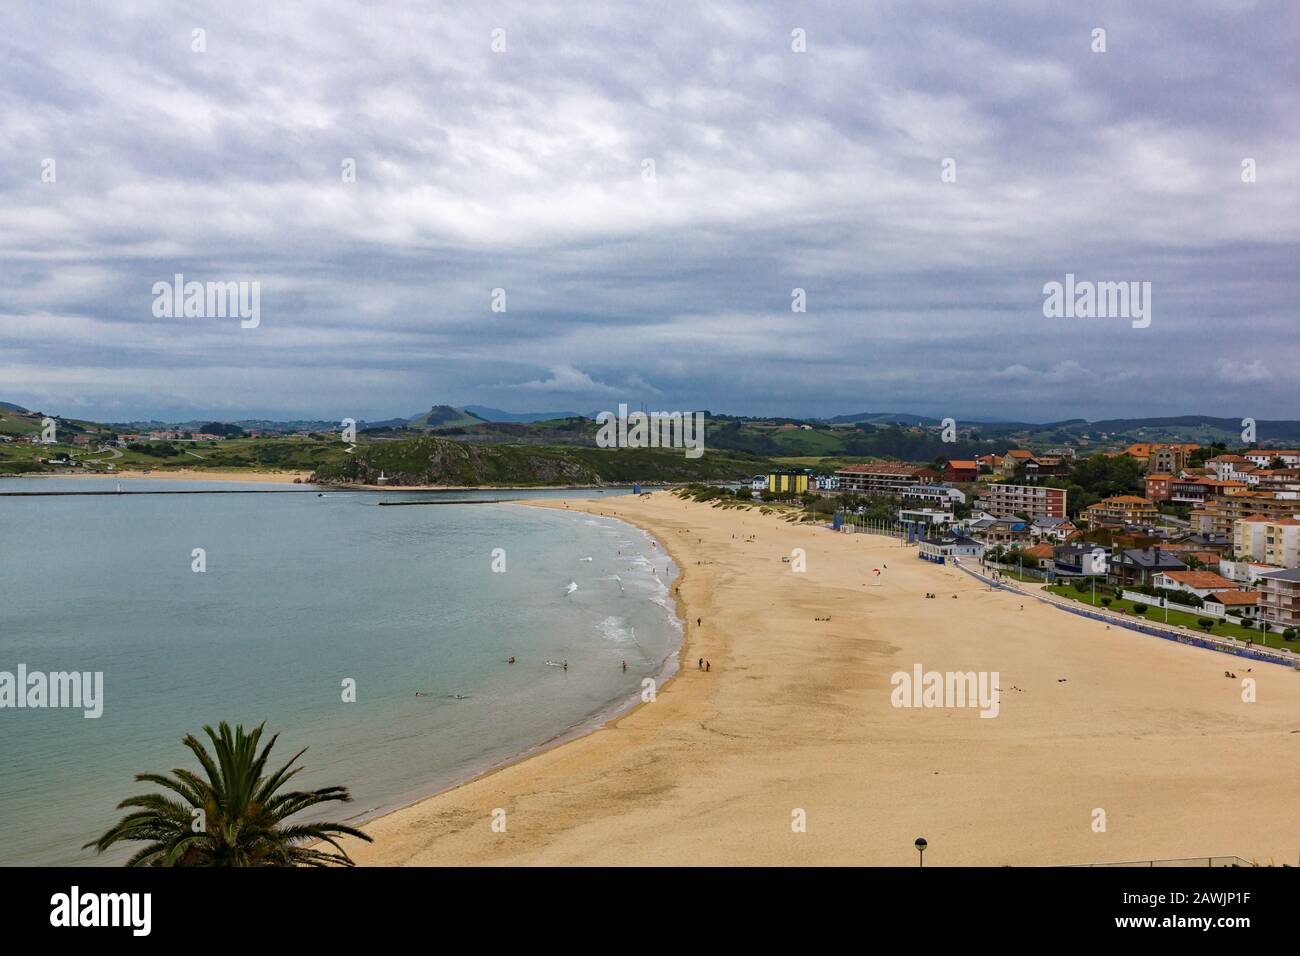 View on a deserted atlantic beach Stock Photo